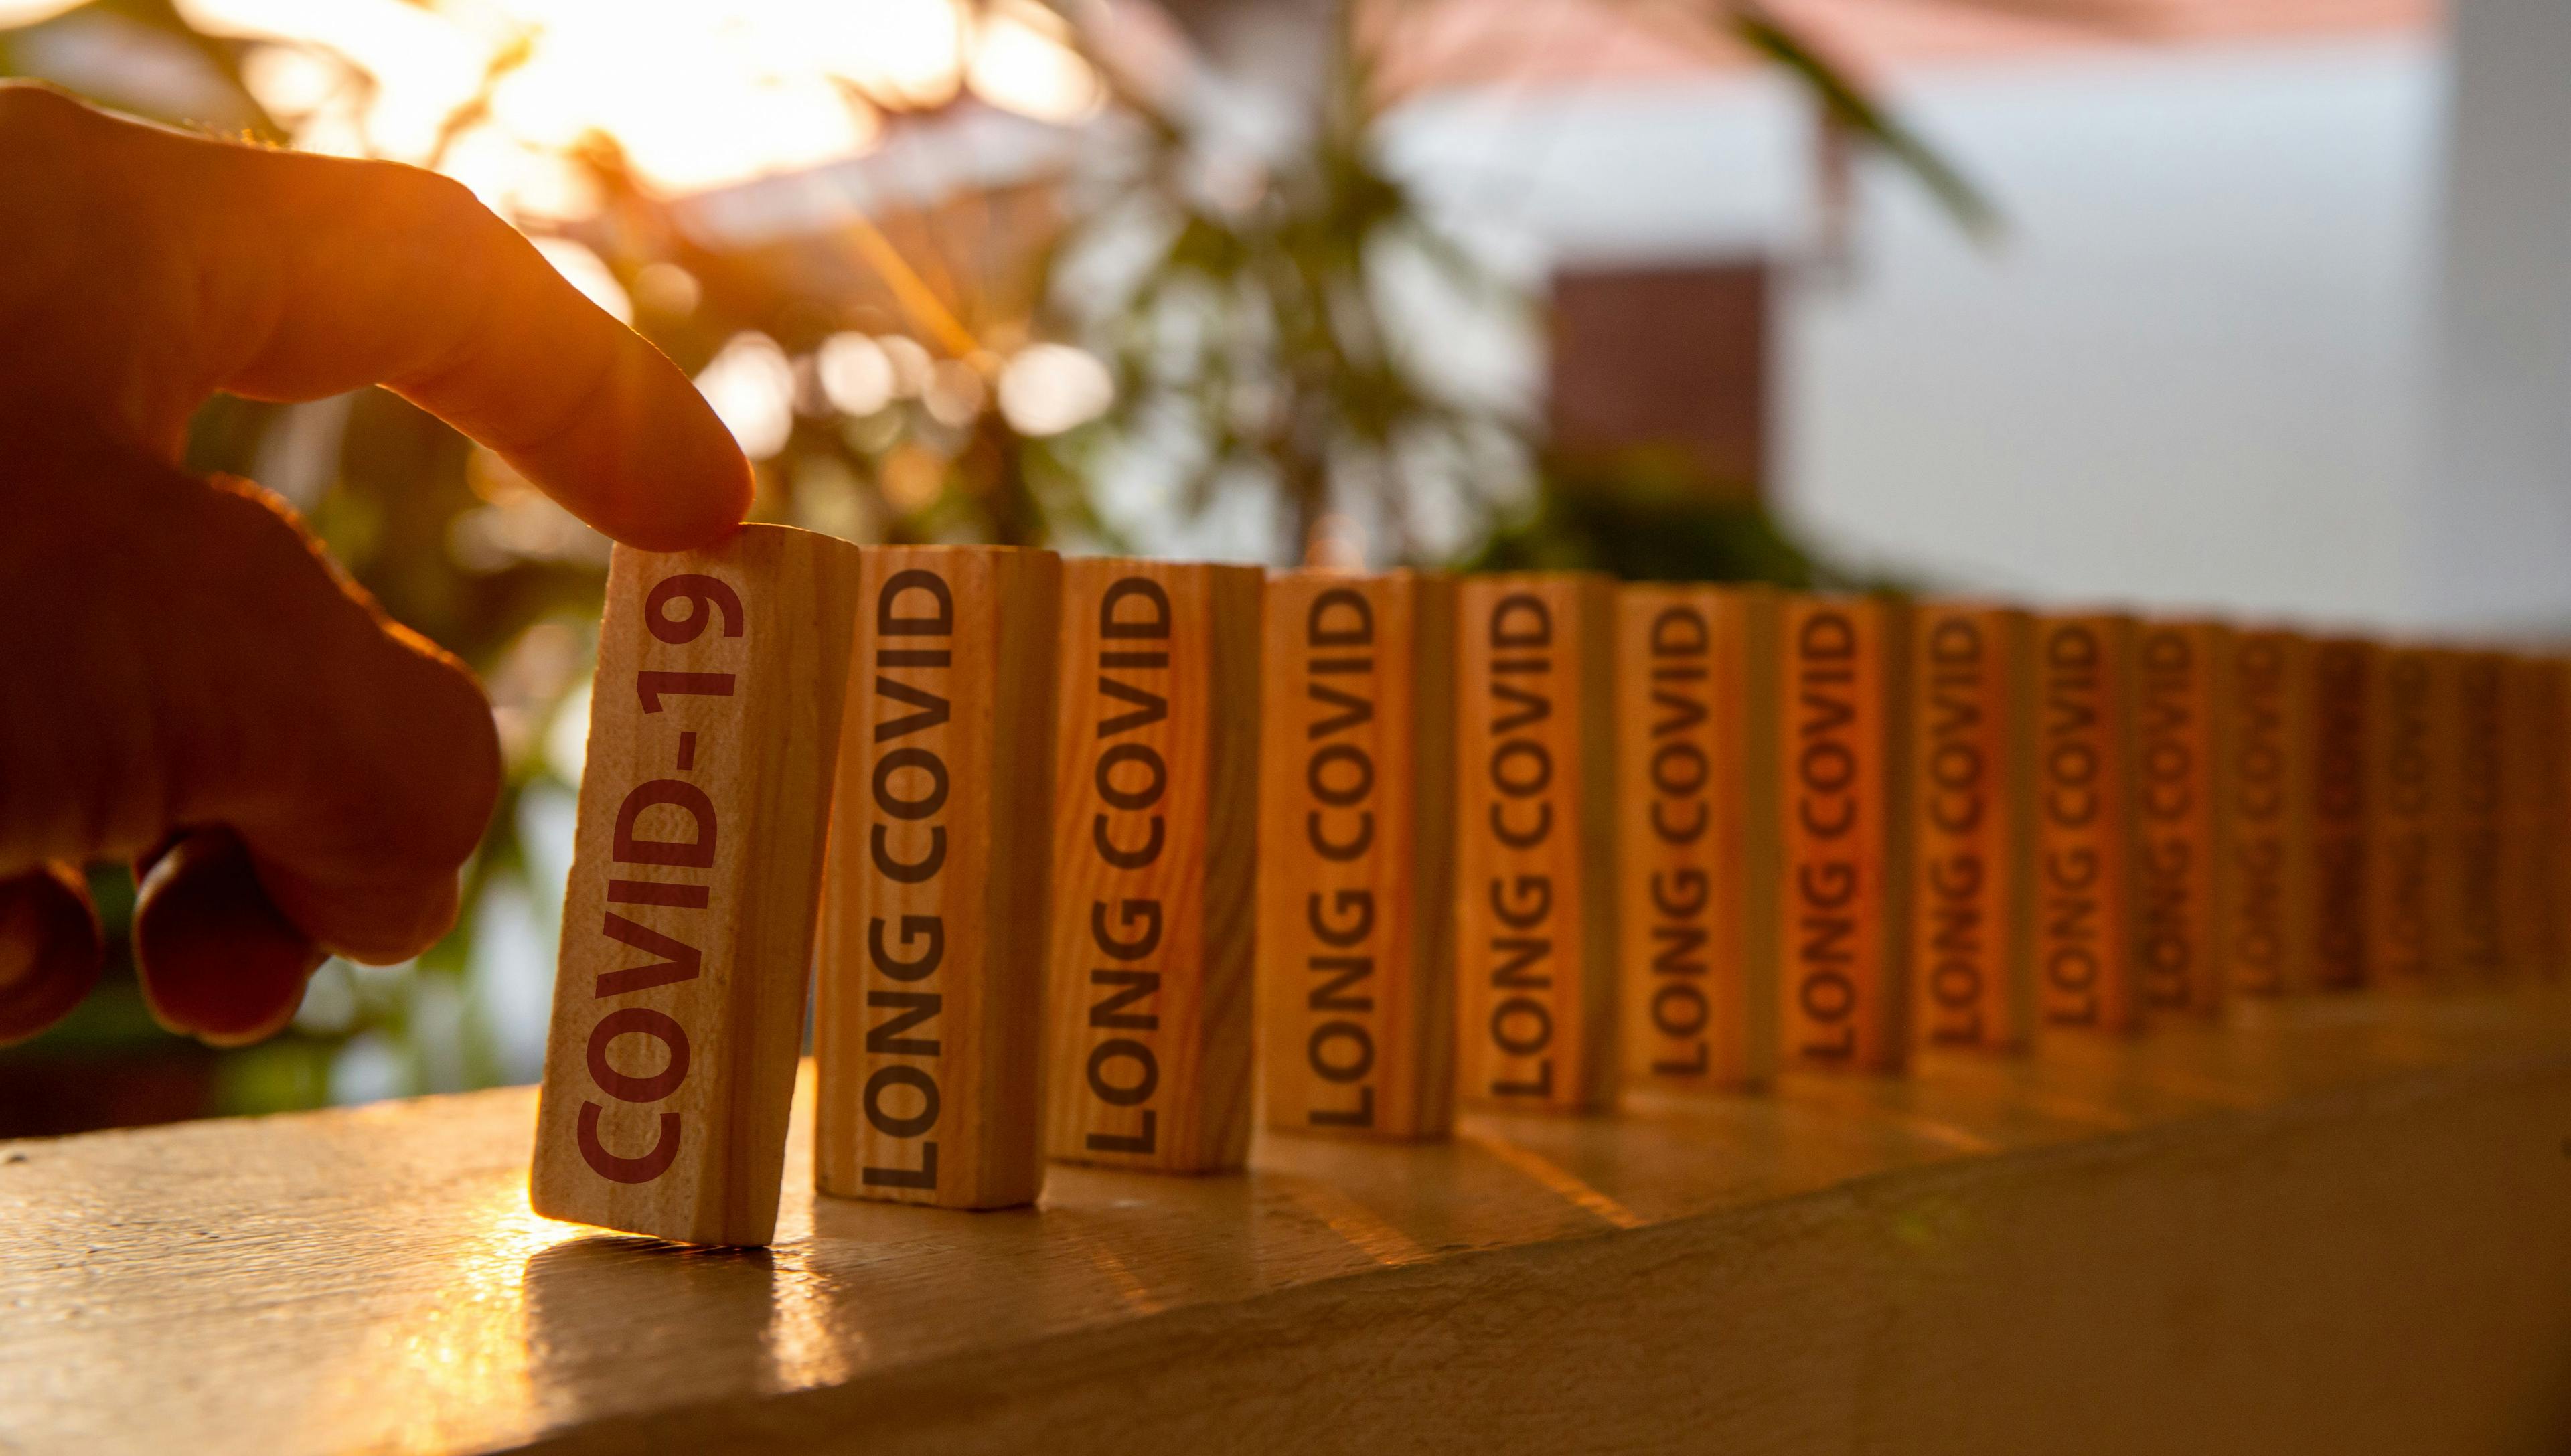 "Long COVID" printed on wooden dominoes / Anucha - stock.adobe.com